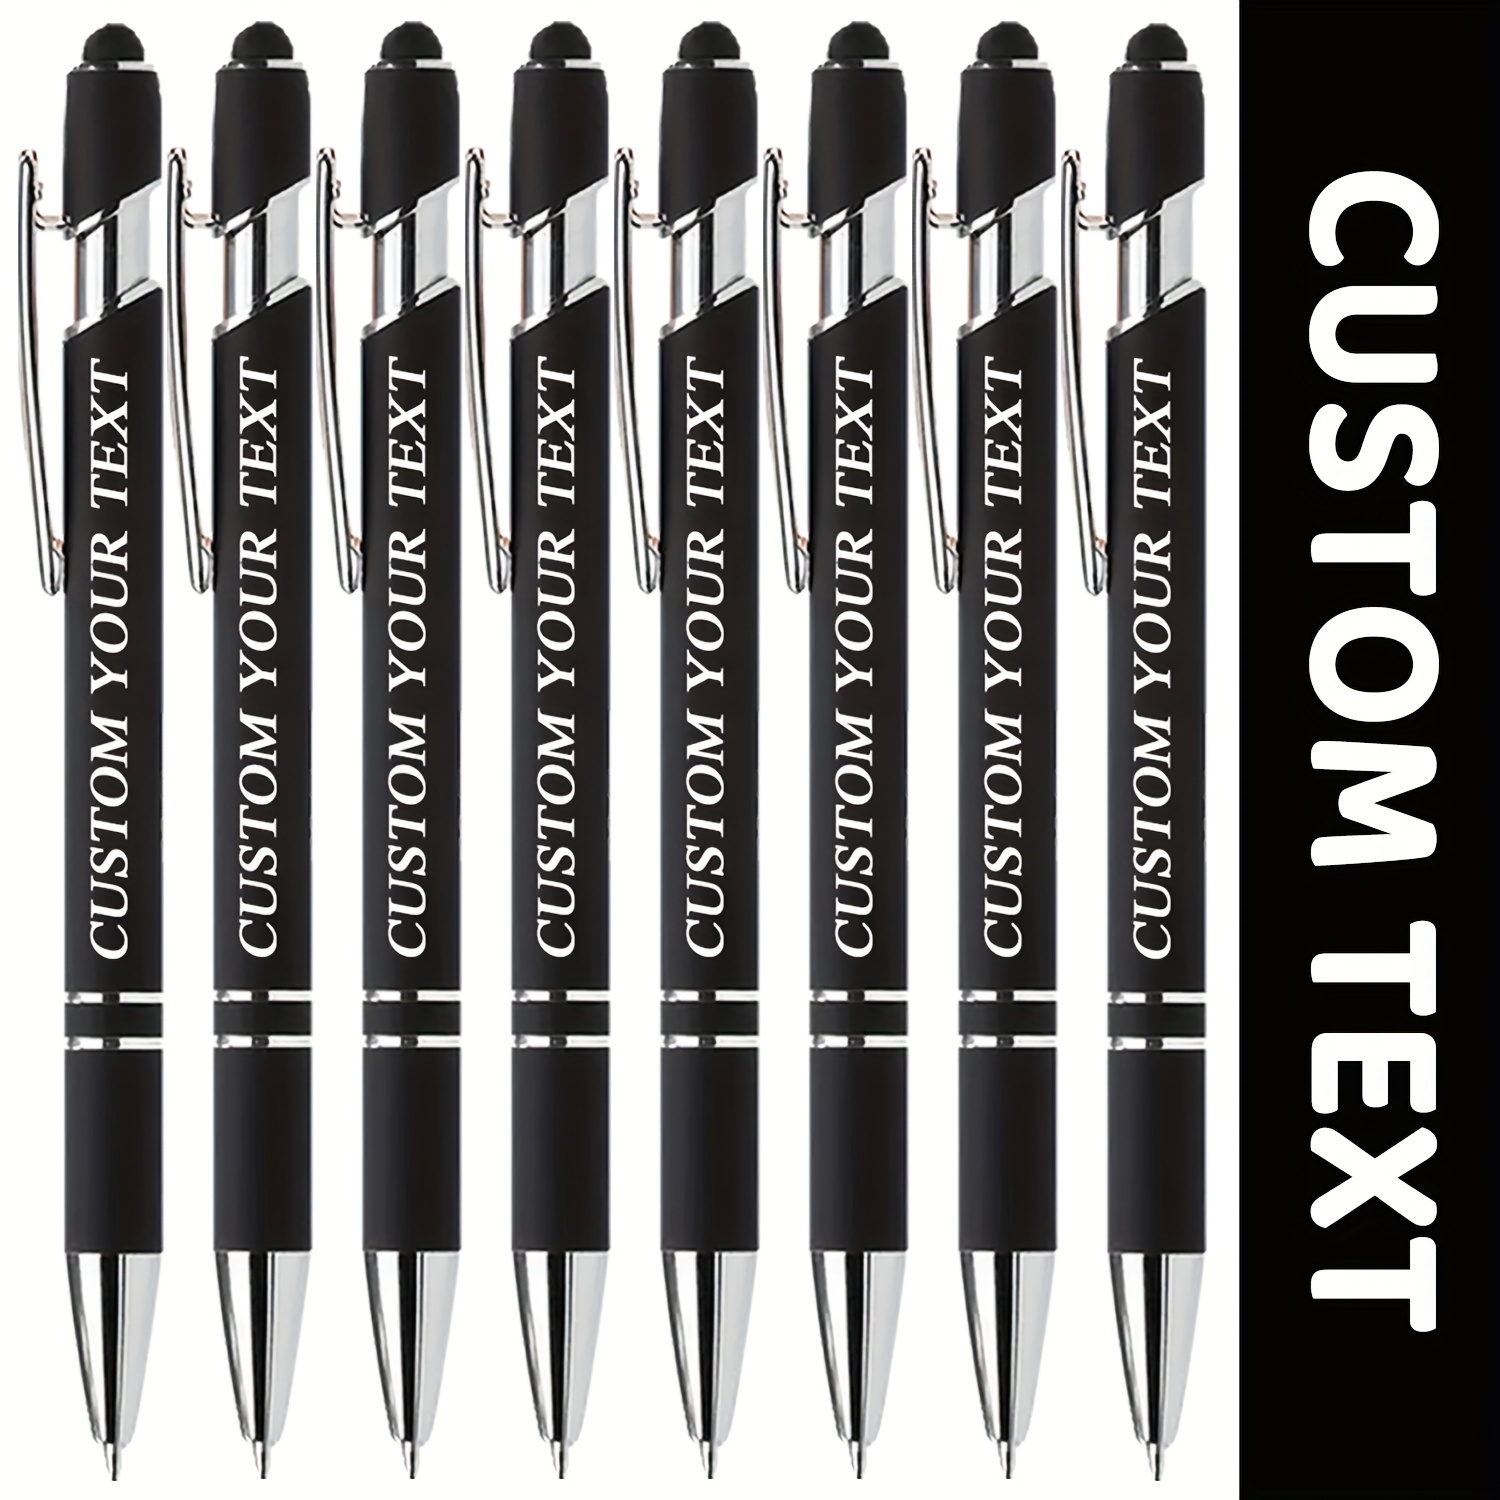 

[custom] 8pcs Custom-made Ballpoint Pens, 5 Colors To Choose From, Black Ink, 2 In 1 Functions For Writing And Touch Screen Use. Perfect Gift For Friends, Colleagues, Family, And More.